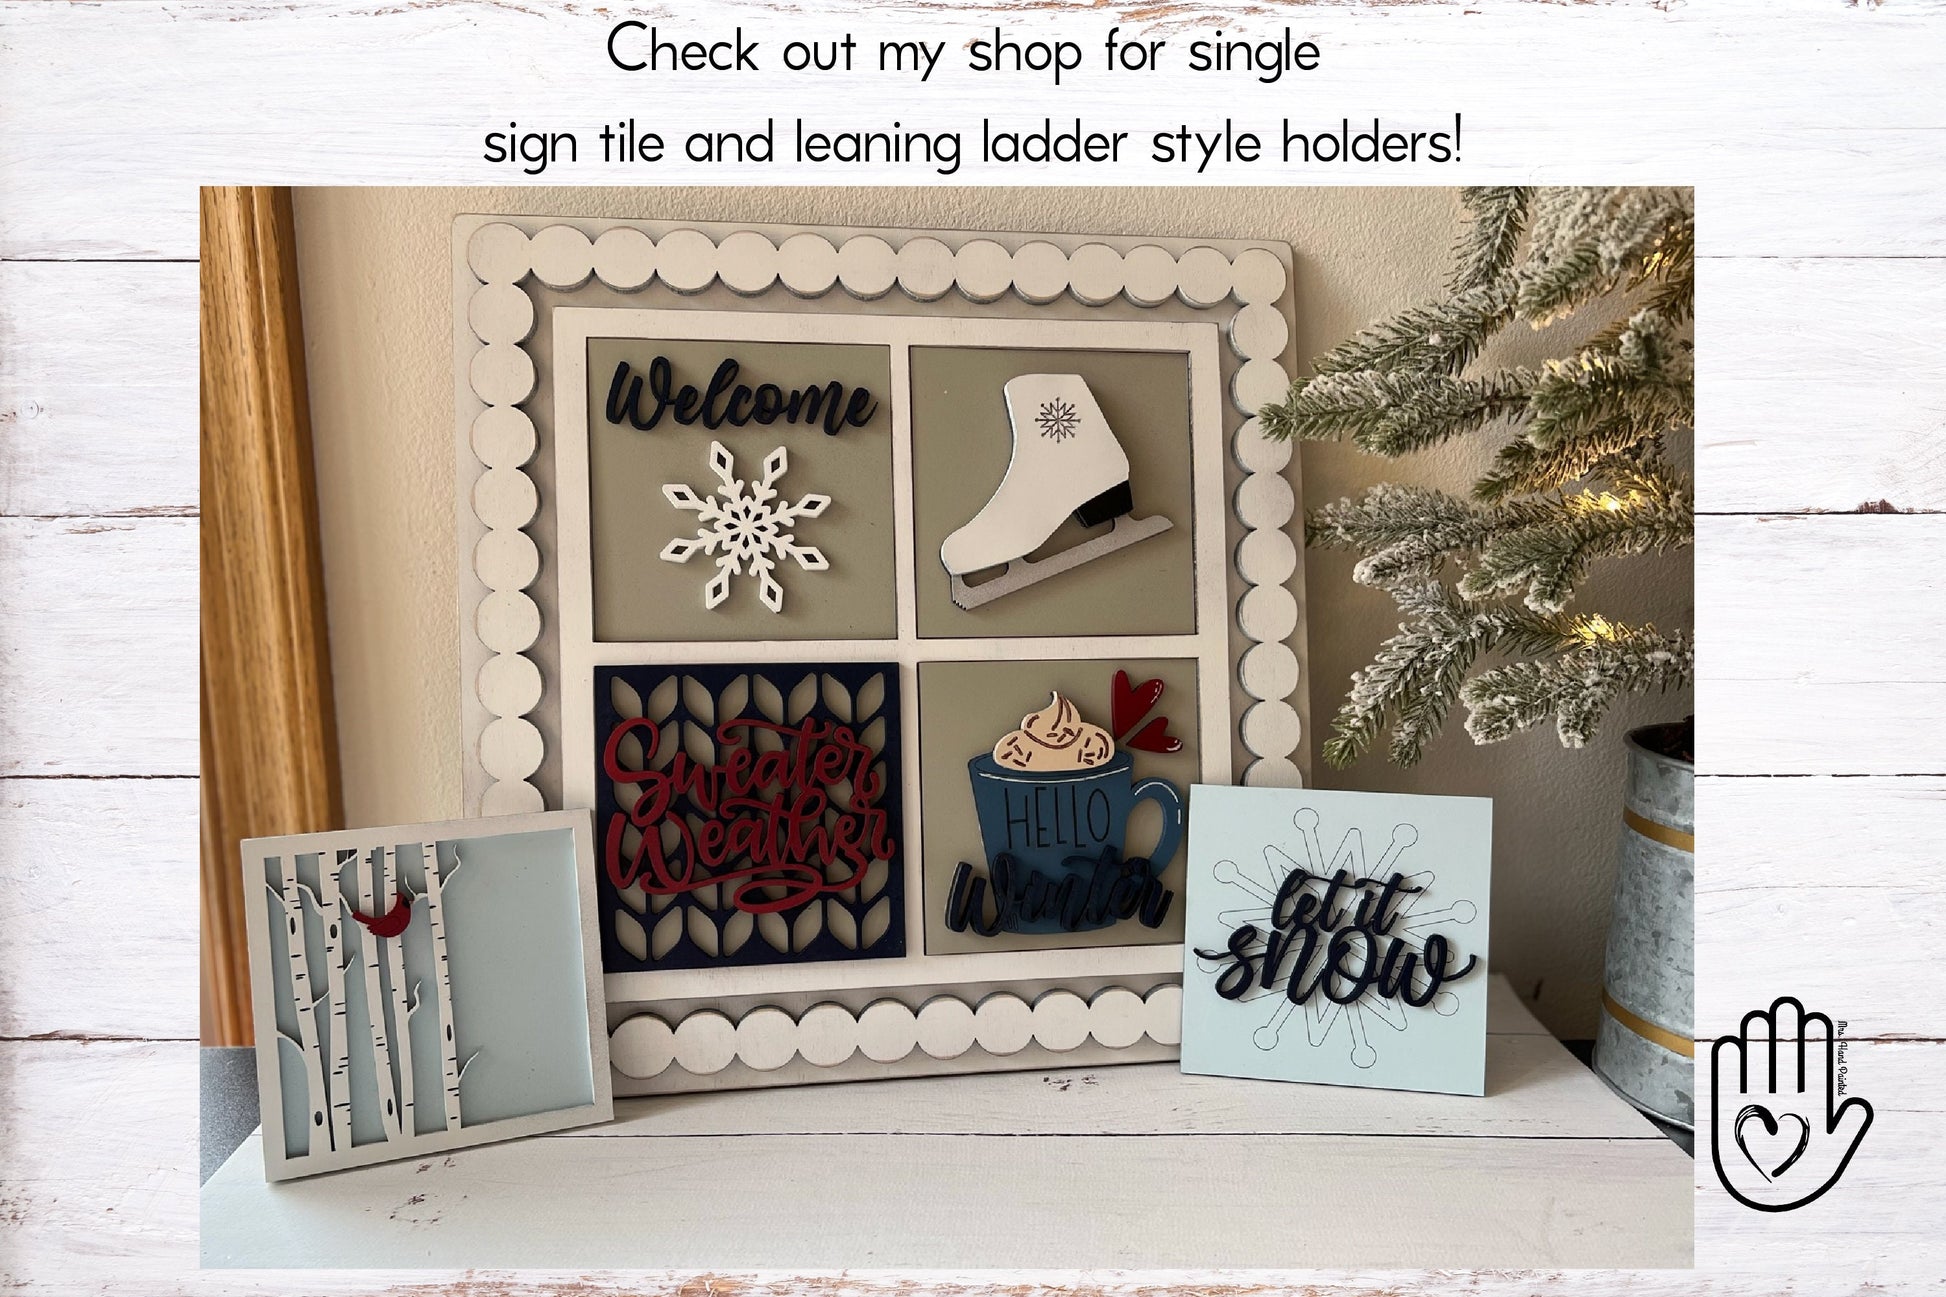 Winter Leaning Ladder Interchangeable Signs - Laser Cut Wood Painted